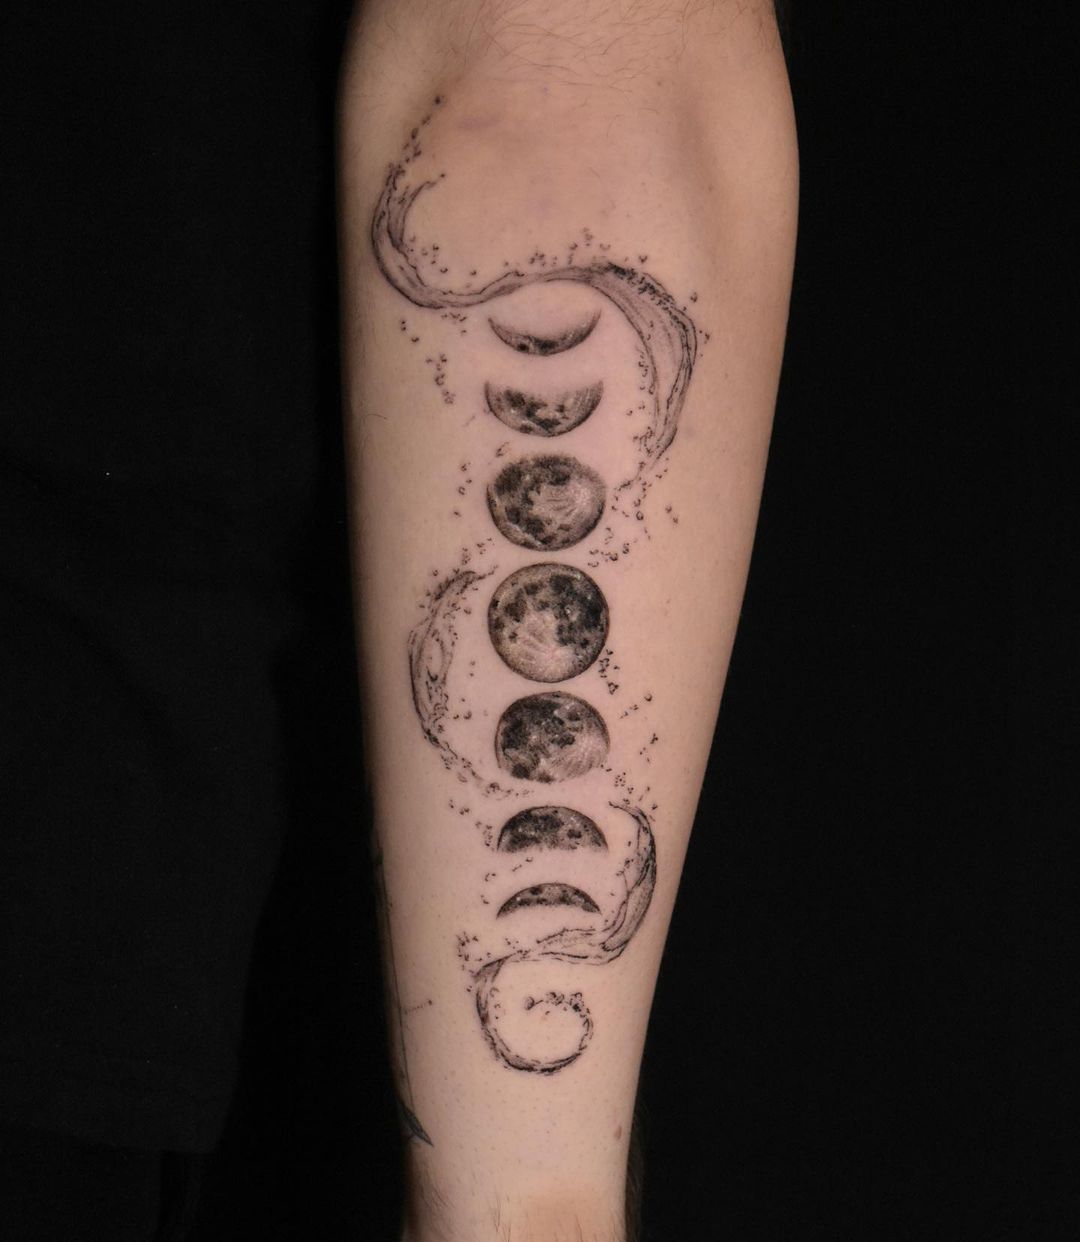 Moon phases with water tattoo. (Source: @squidzink_)